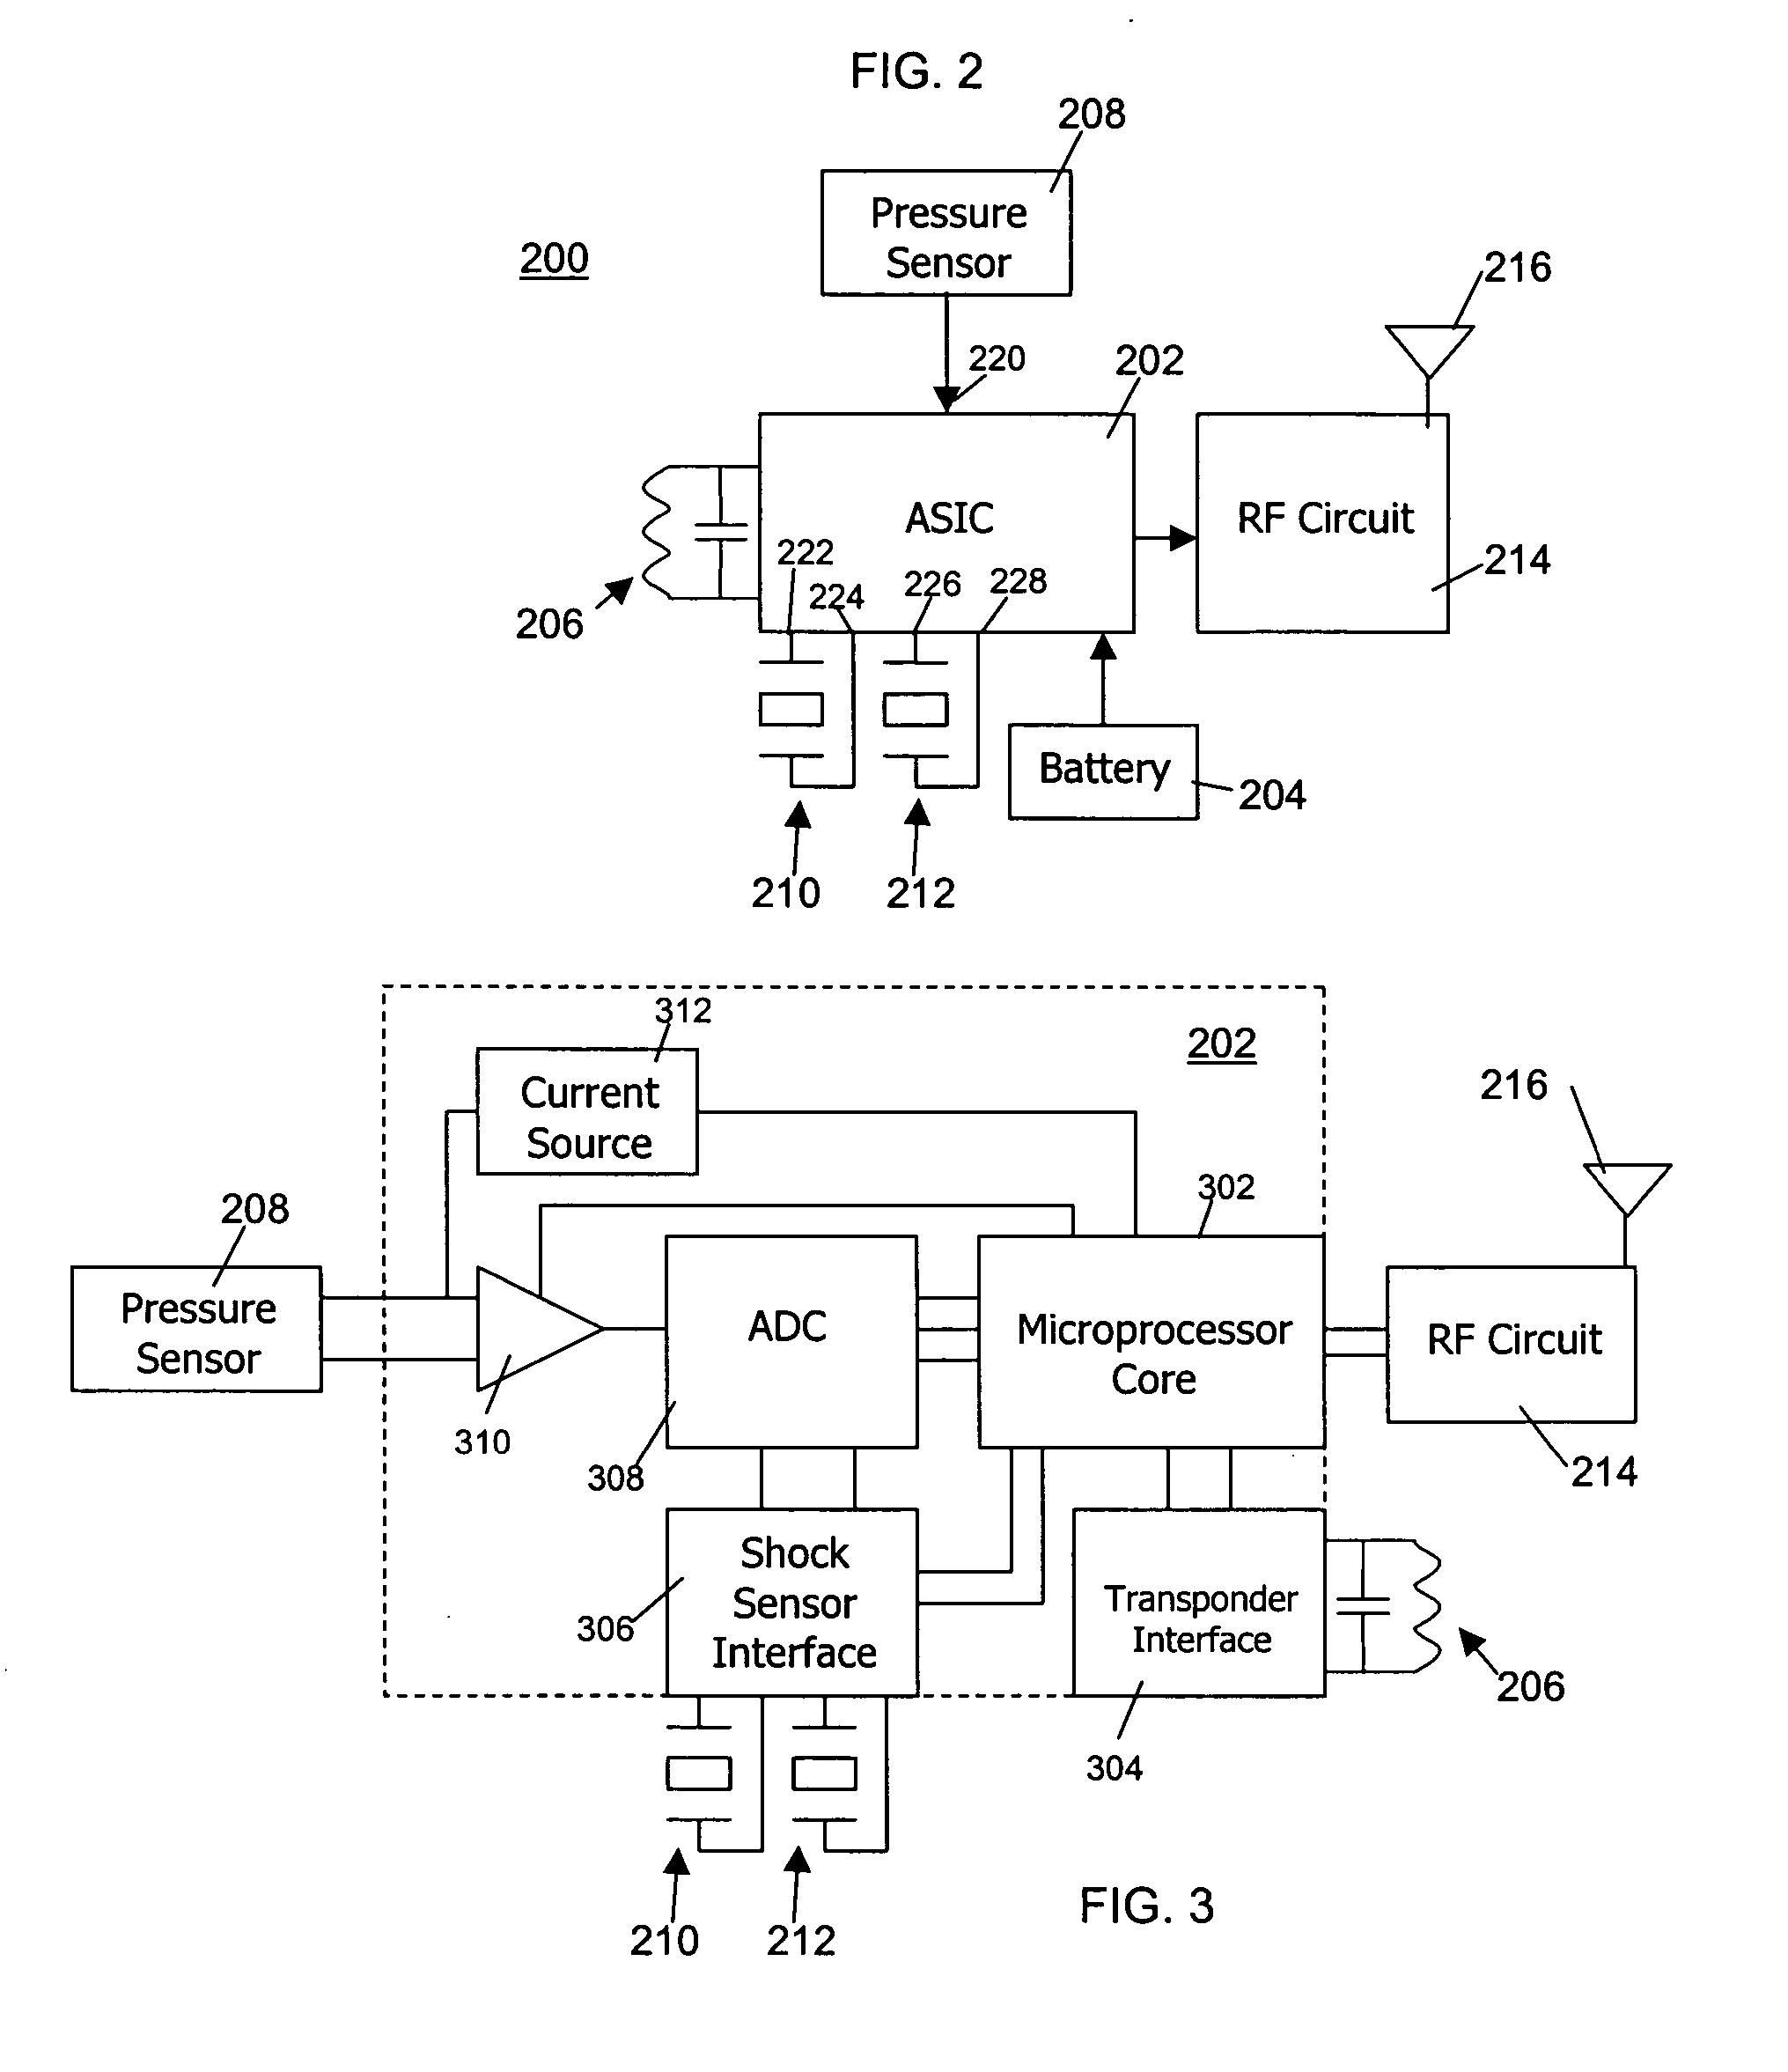 Motion detection using a shock sensor in a remote tire pressure monitoring system